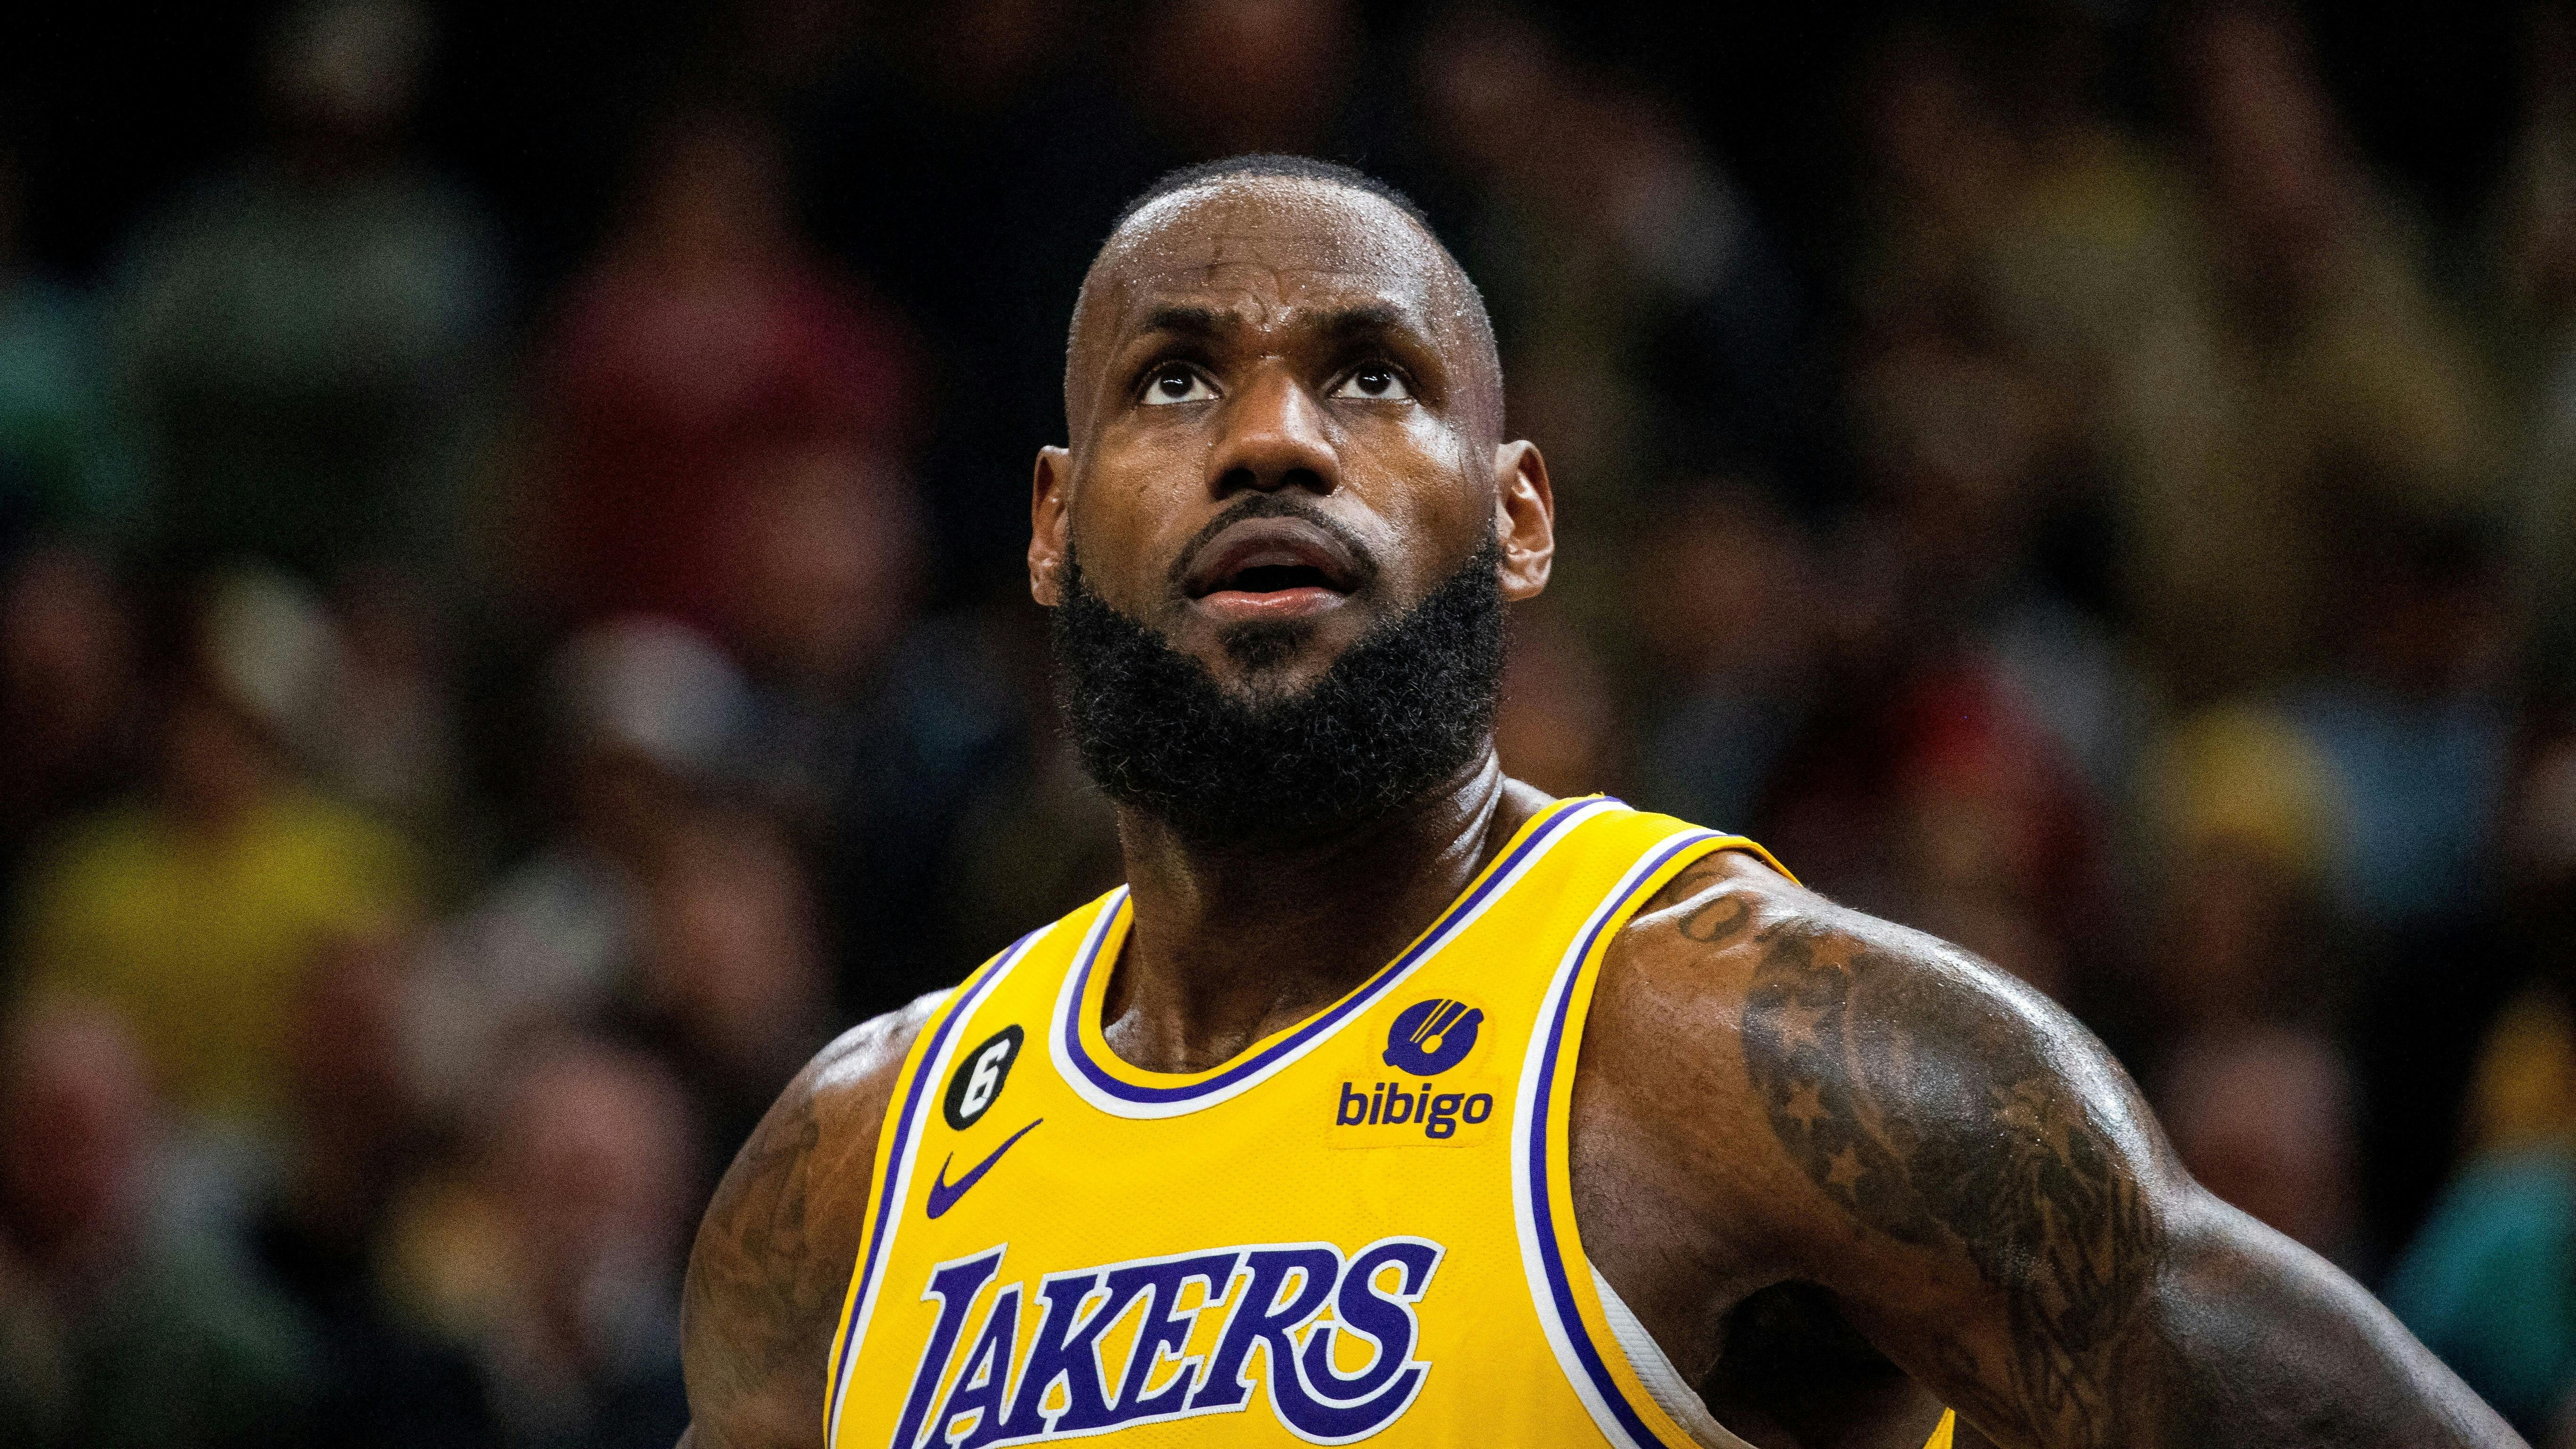 Abdicating the throne: LeBron James floats retirement as Lakers face offseason of uncertainty